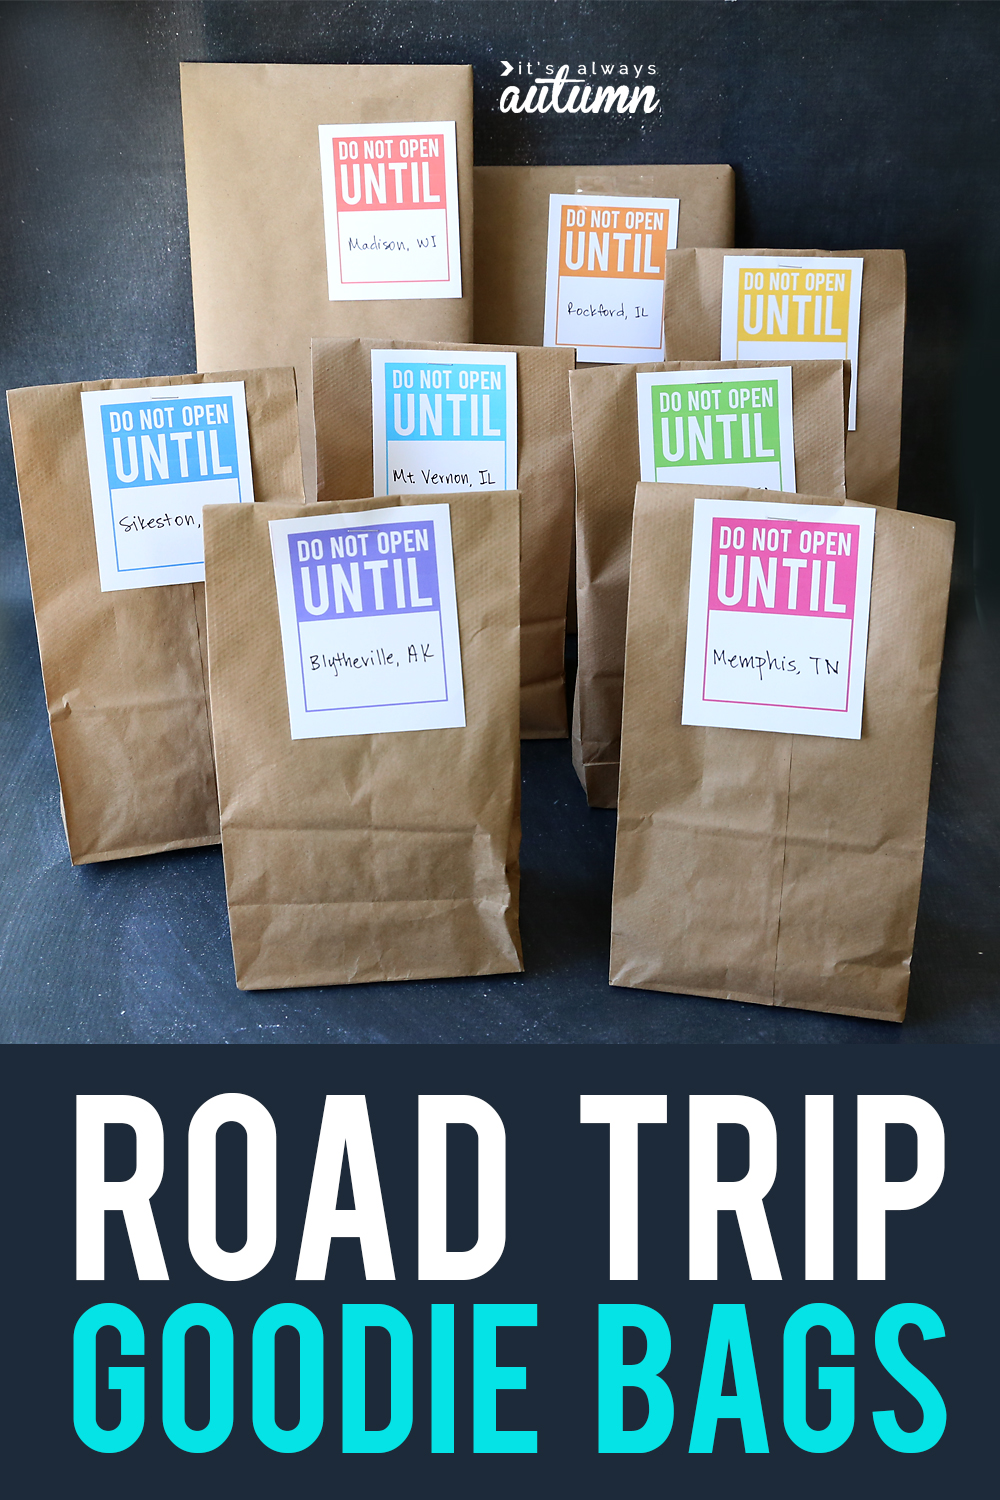 Road trip goodie bags: keeps kids occupied + count down the trip! - It&#39;s Always Autumn